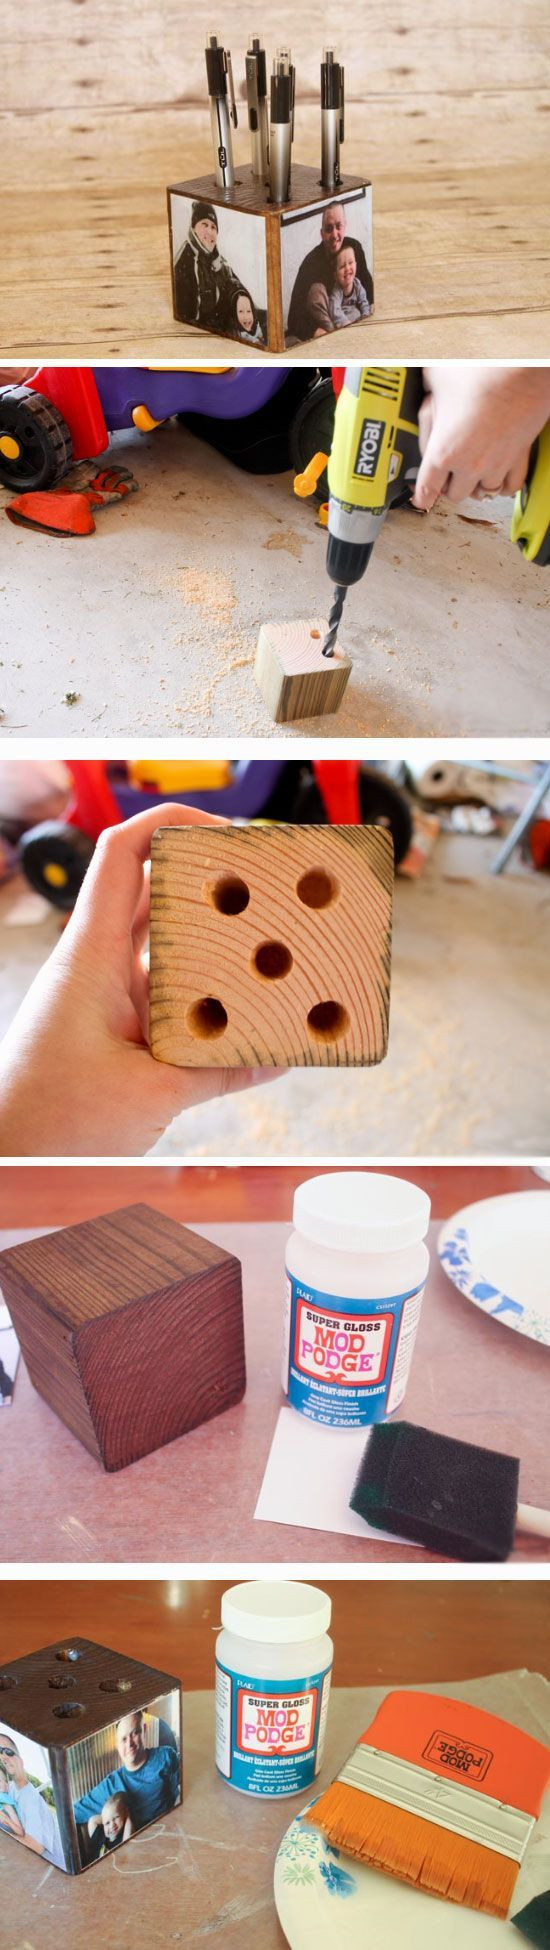 DIY Gifts For Dad Christmas
 Best 25 Gifts For Dad ideas on Pinterest